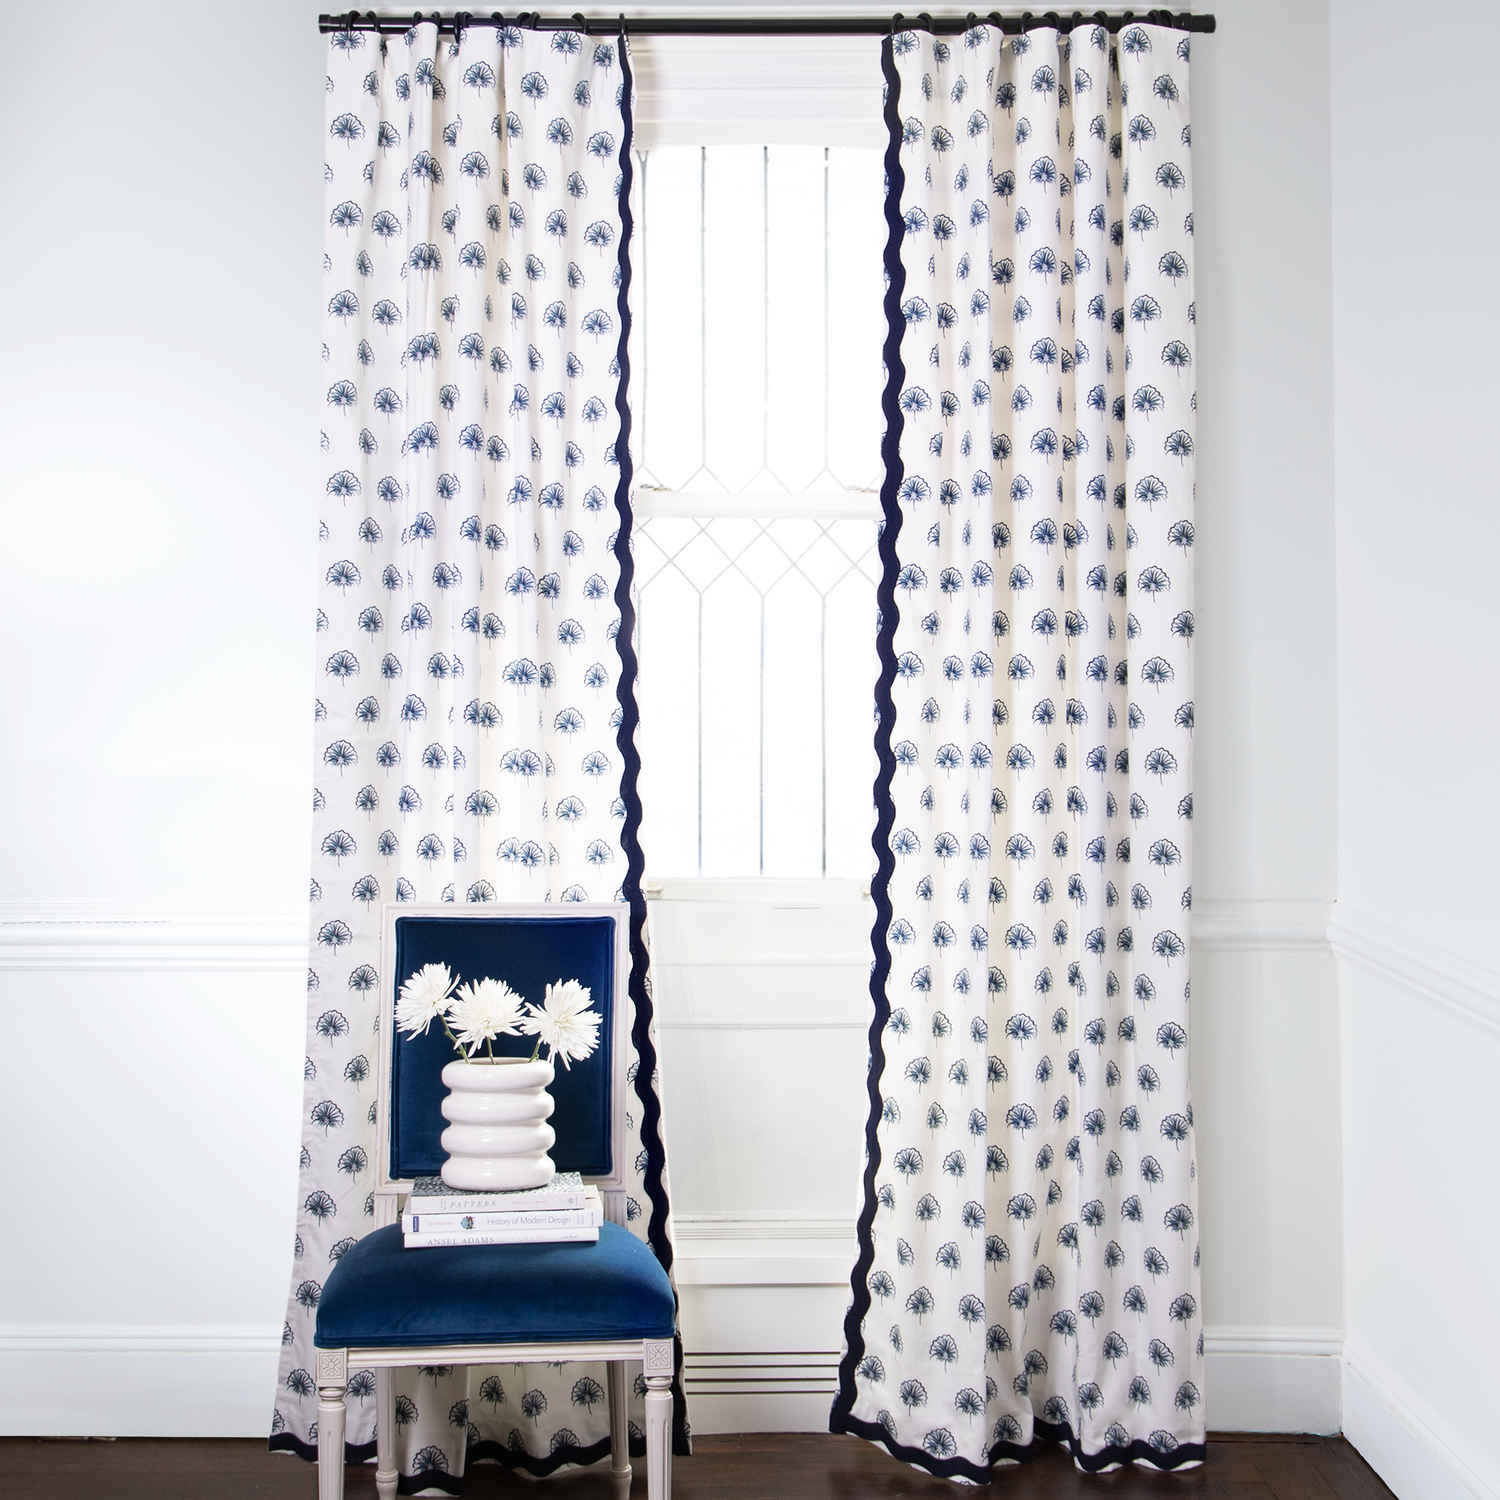 Floral Navy Printed curtains with Navy trim on metal rod in front of an illuminated window with Blue Velvet chair with white flowers in white vase on top of stacked books